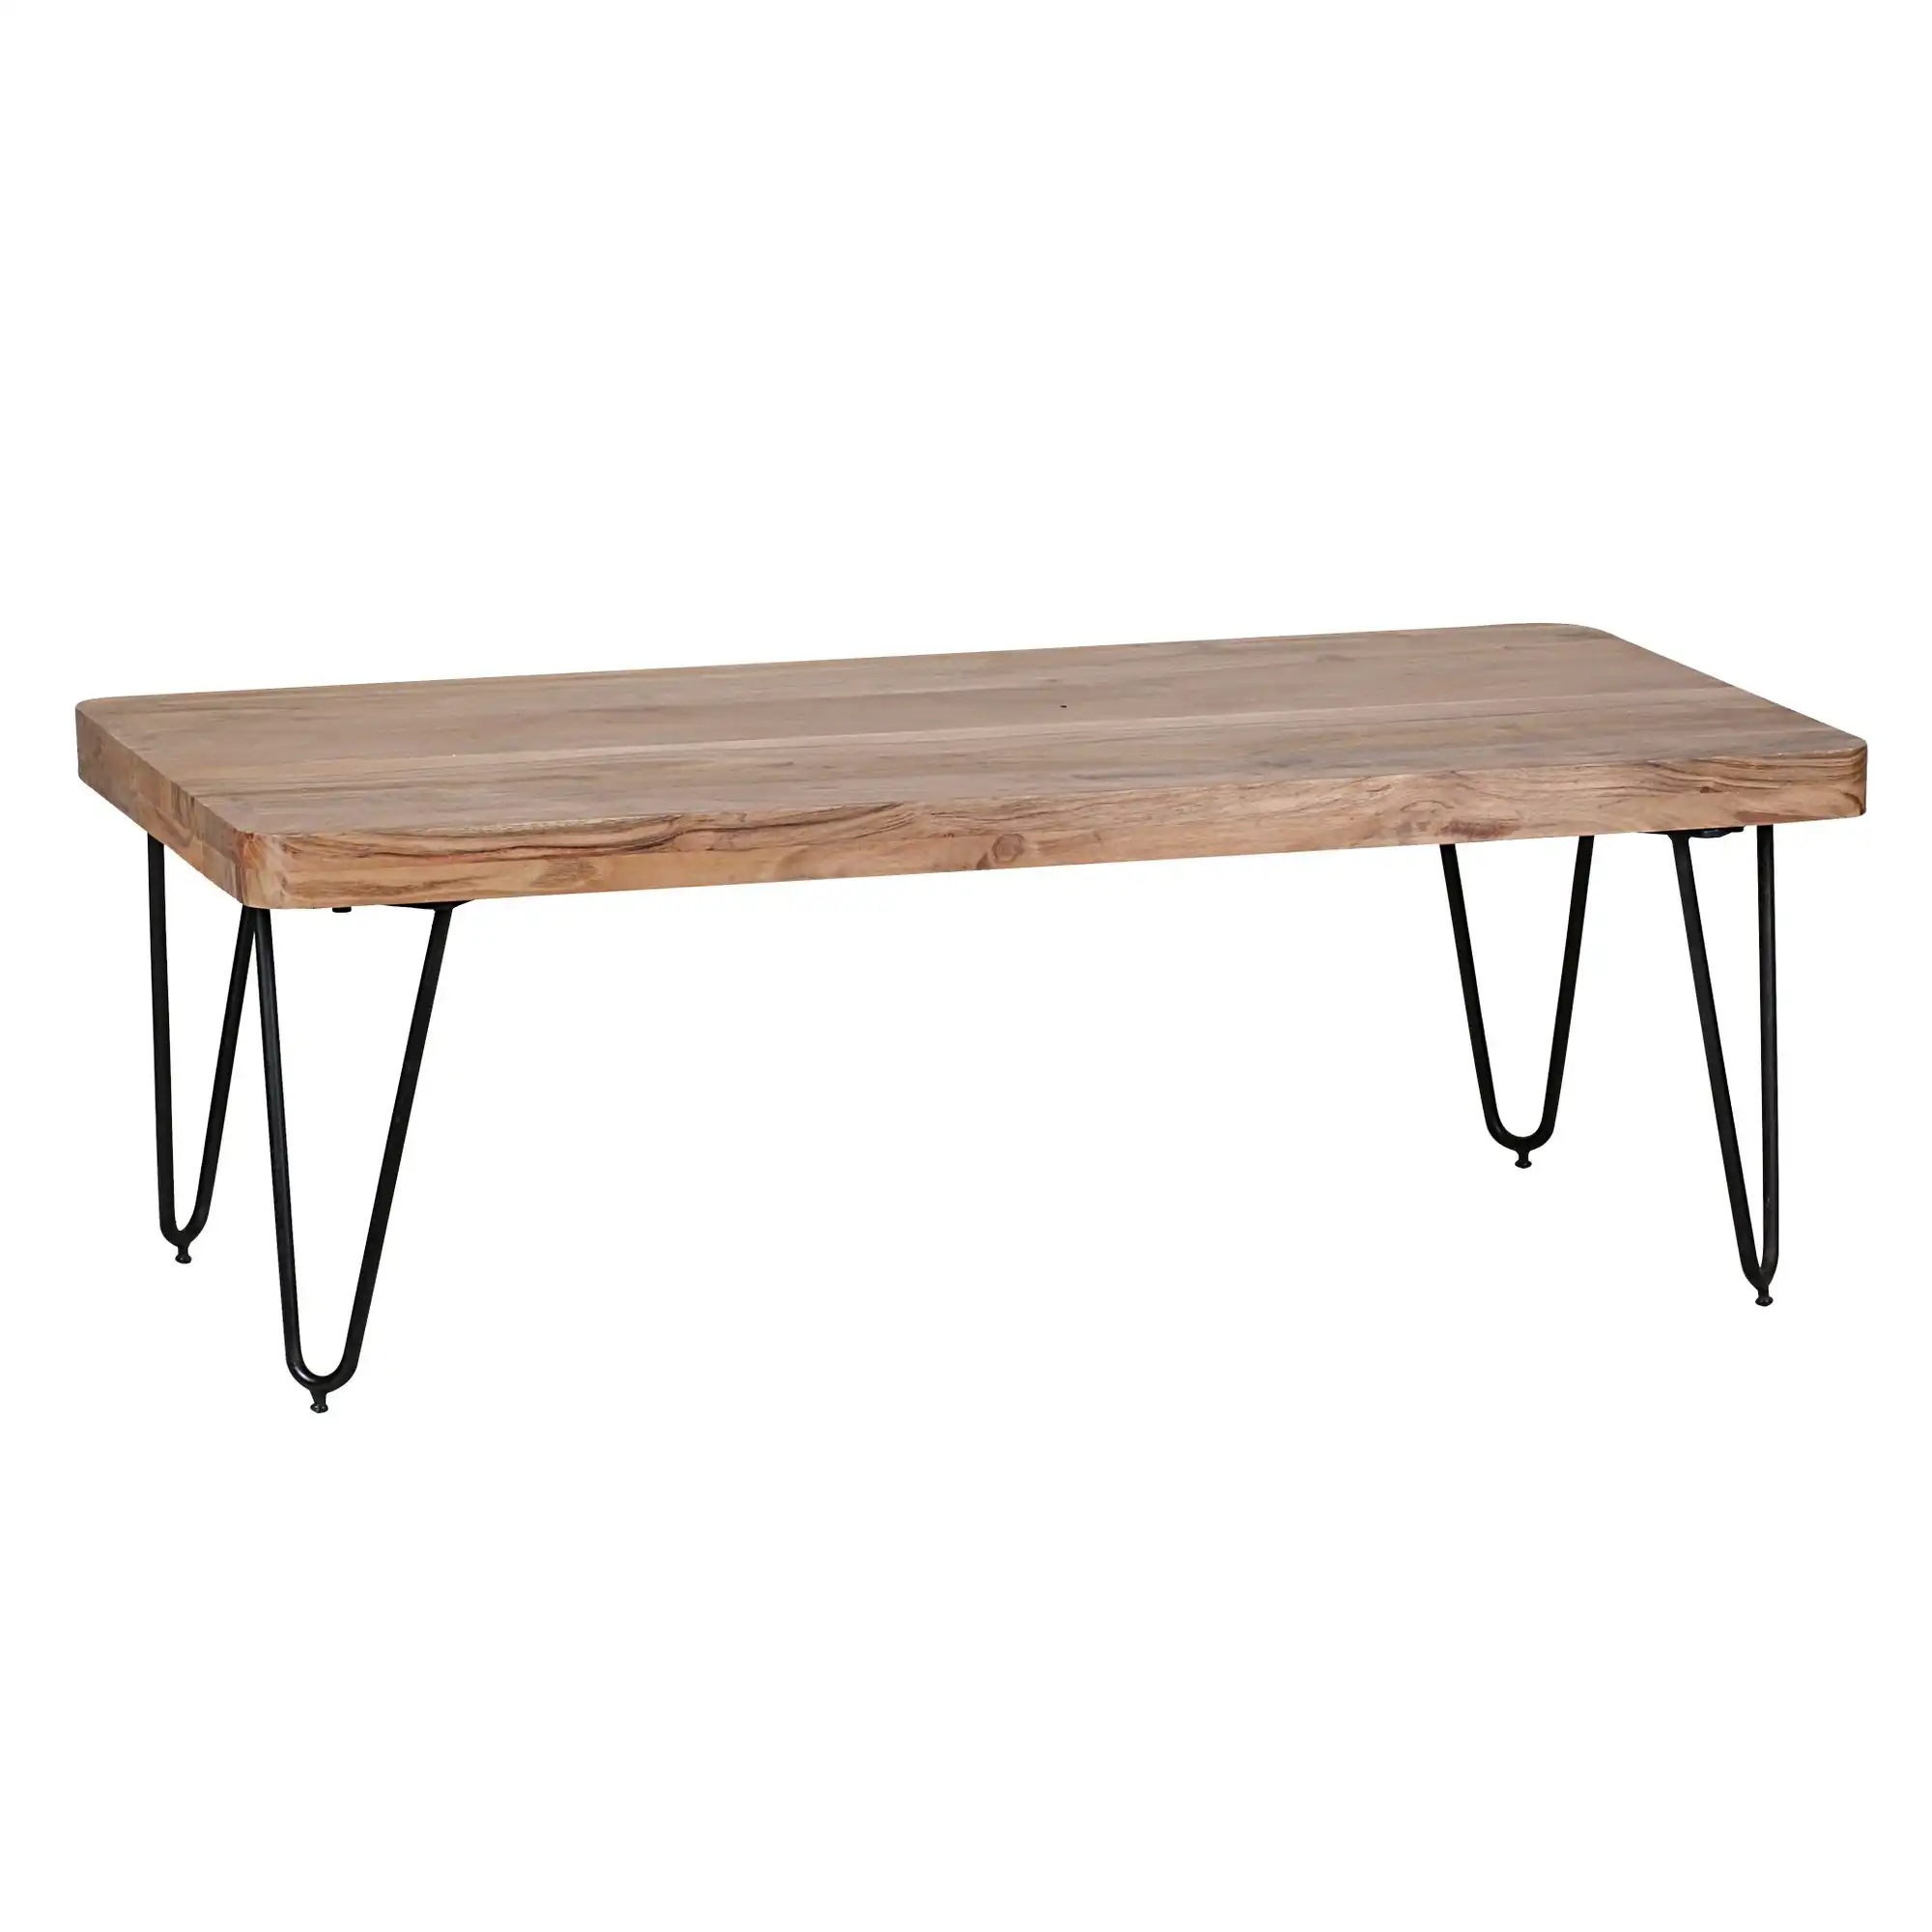 Wooden Coffee Table with Iron Hairpin Legs (KD) - popular handicrafts